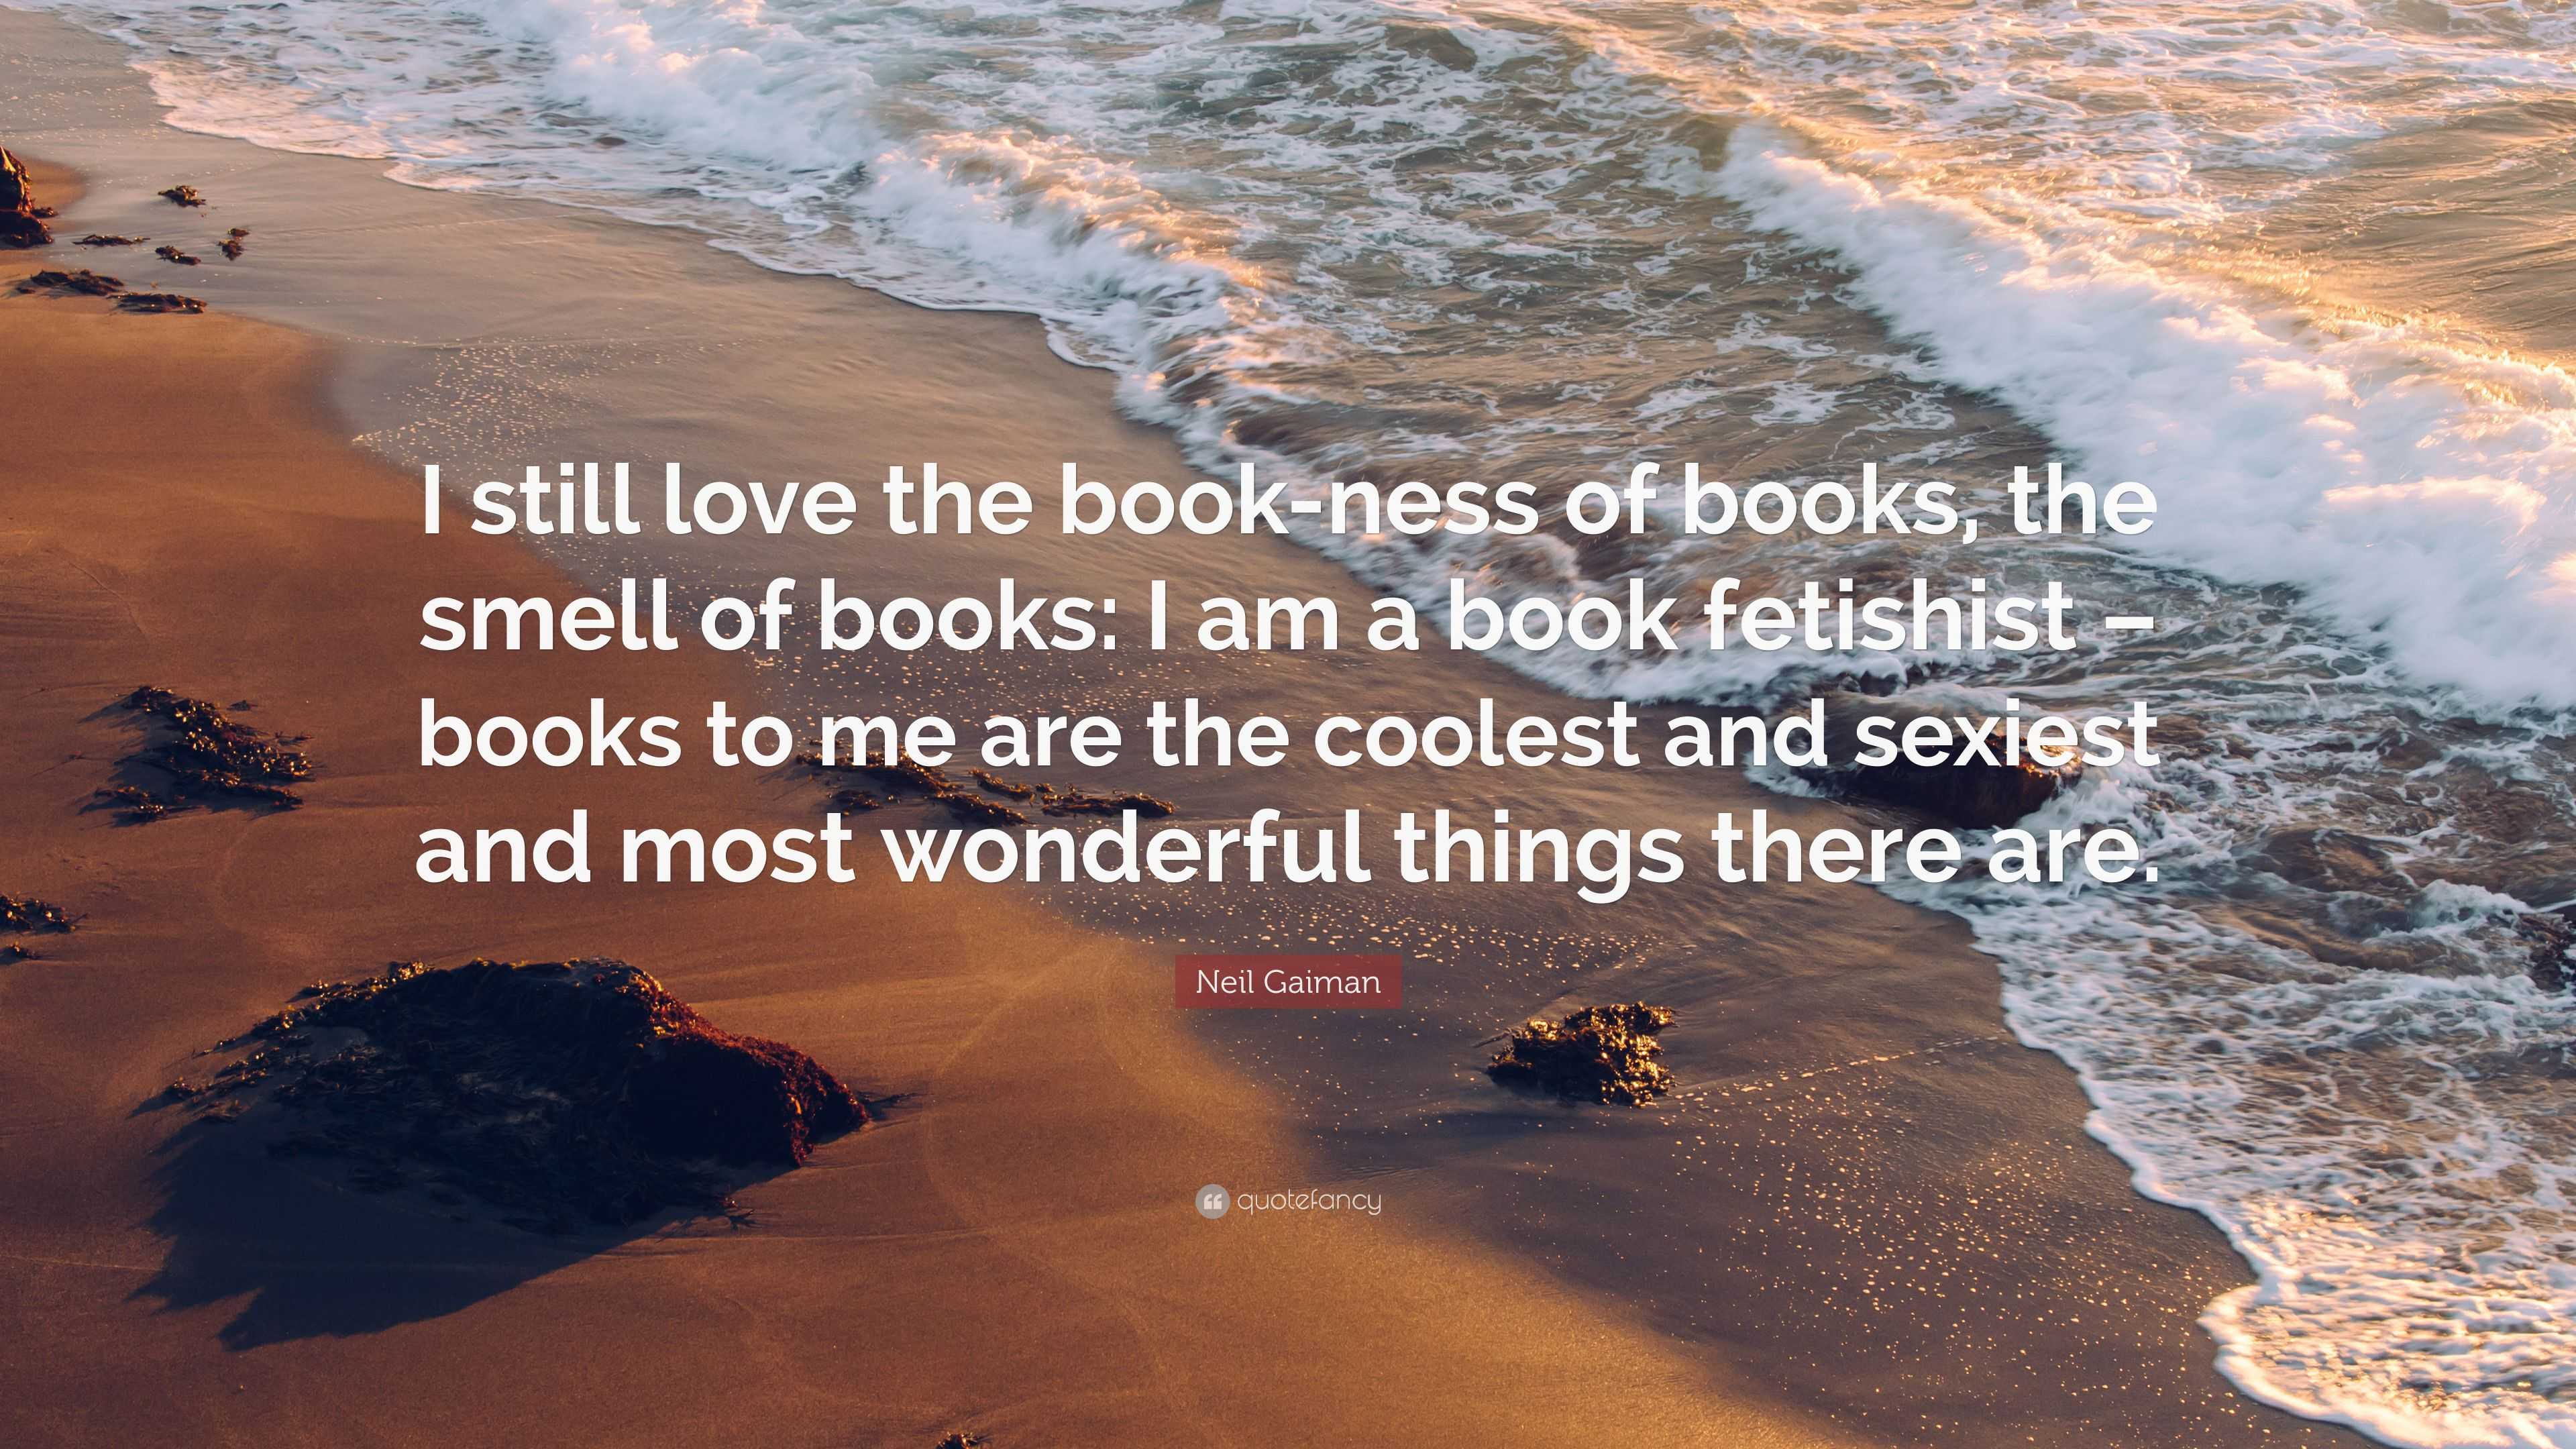 Neil Gaiman Quote: “I still love the book-ness of books, the smell of